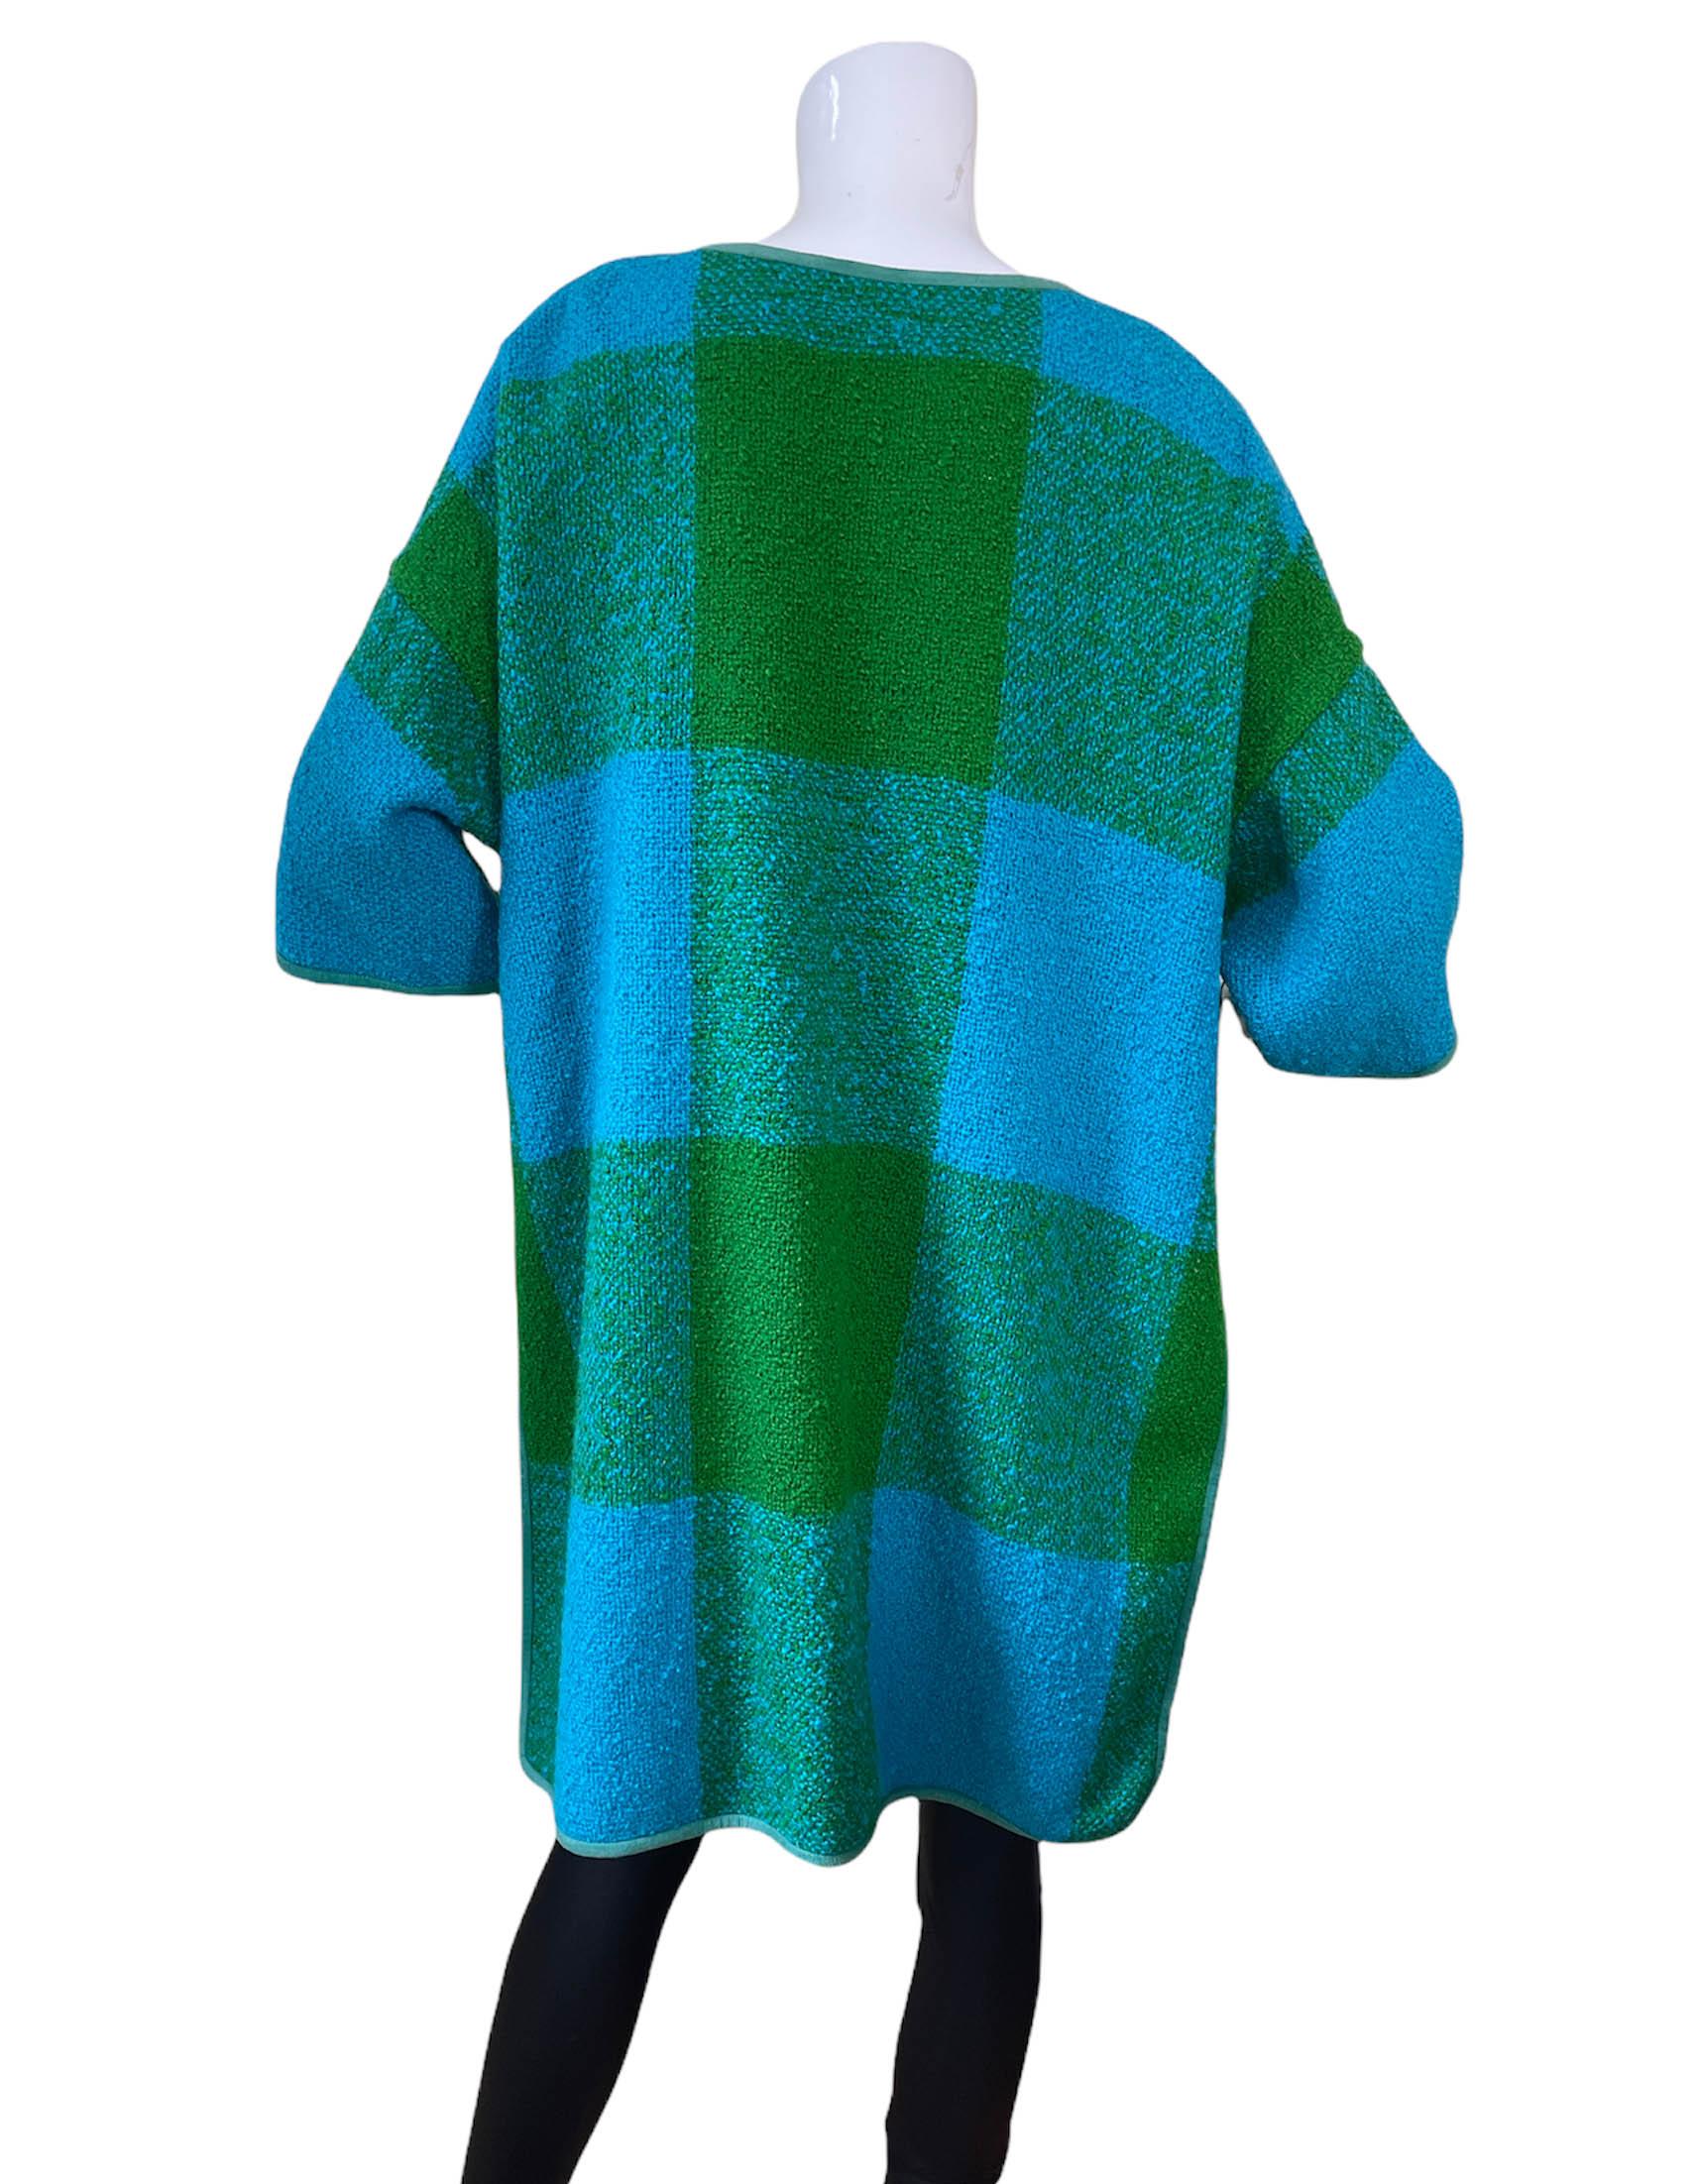 Bonnie Cashin 1960s Blue/Green Plaid Boucle Blanket Coat.  Features drop shoulders and fully slit sides from underarm to hem.

Year of Production: 1960s
Color: Blue and green
Materials: Wool with suede trim- missing composition tag
Lining: